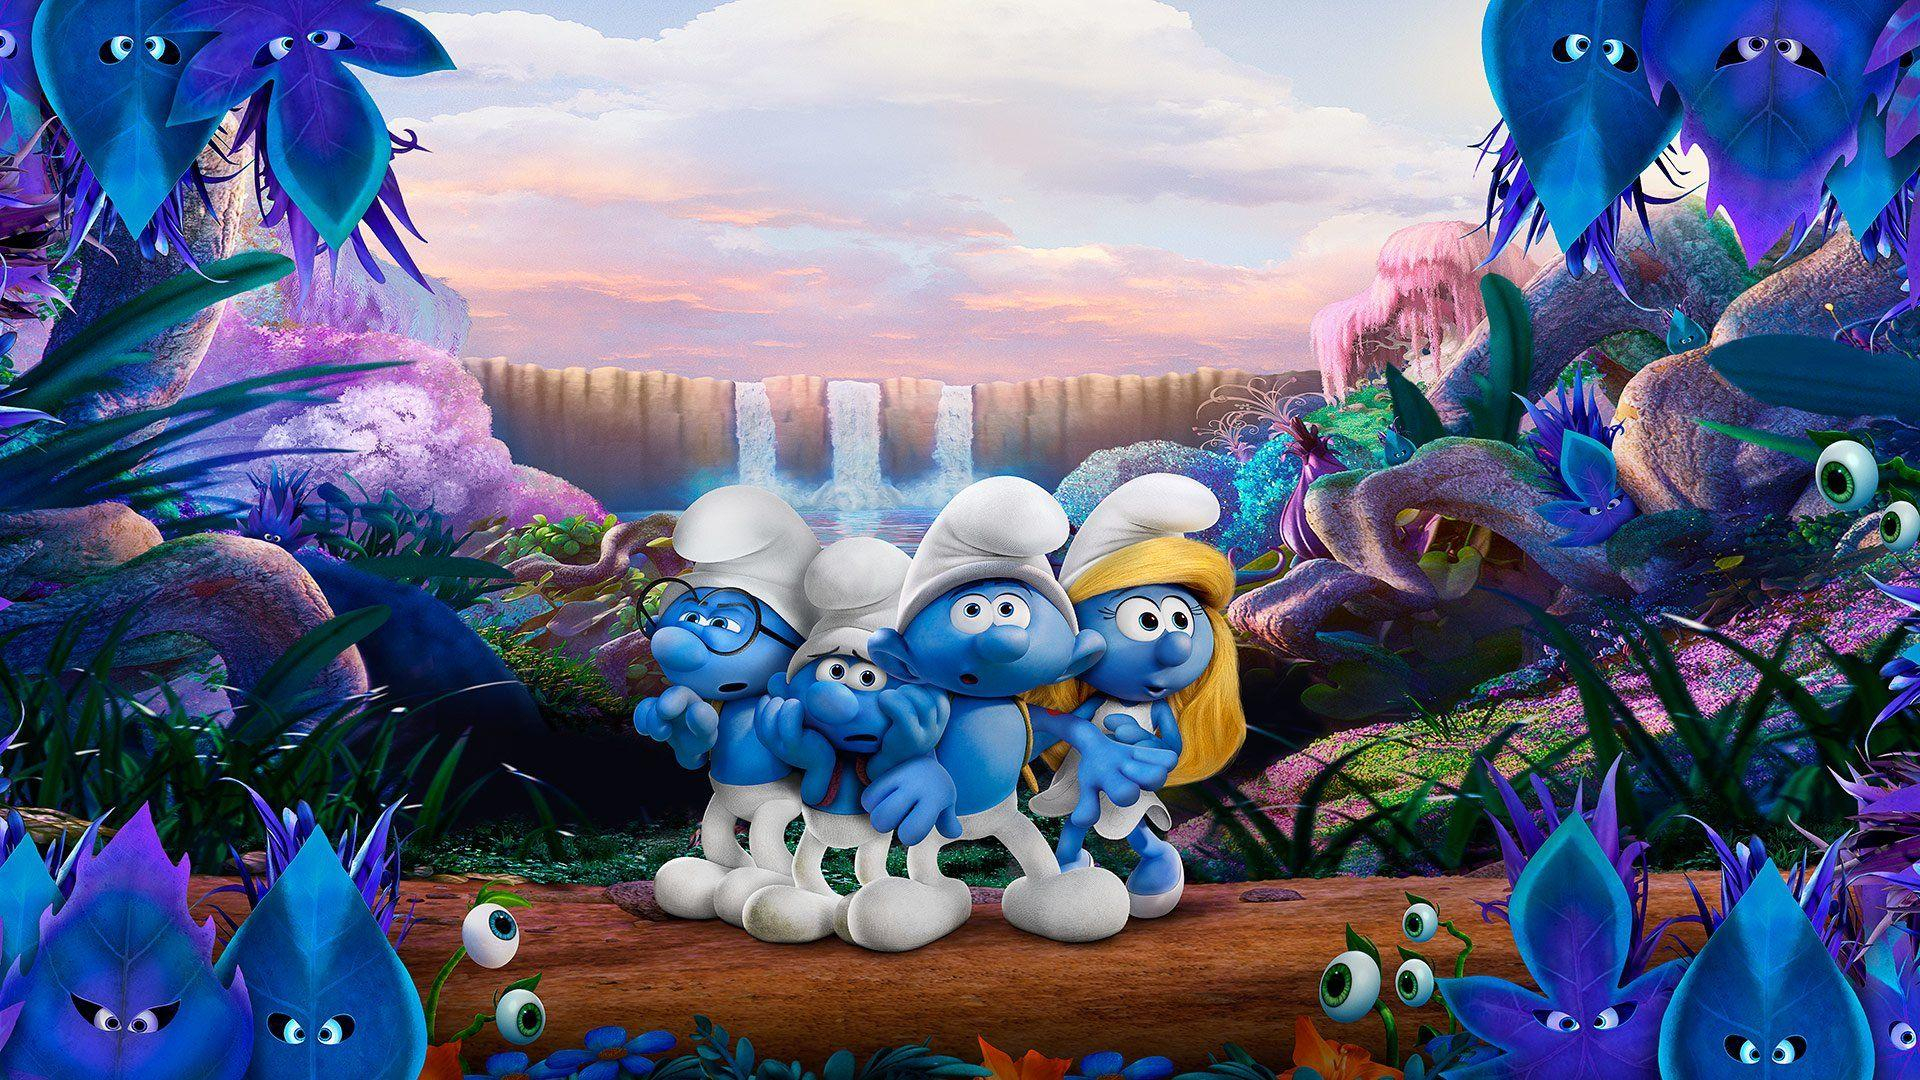 1920x1080 Smurfs Backgrounds